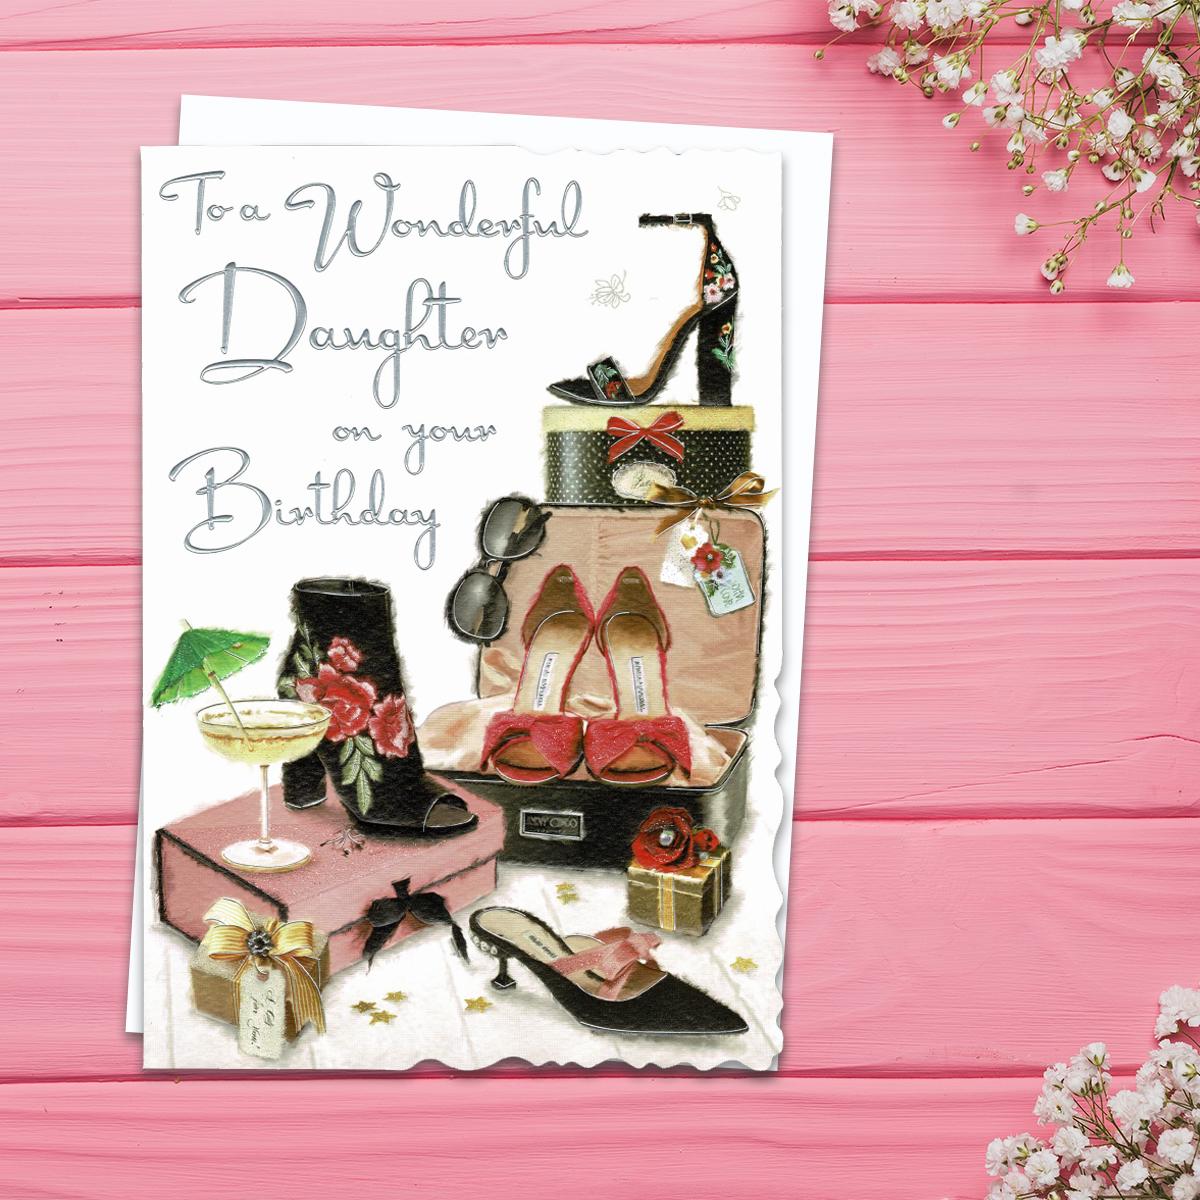 Velvet - Daughter Shoes Birthday Card Front Image